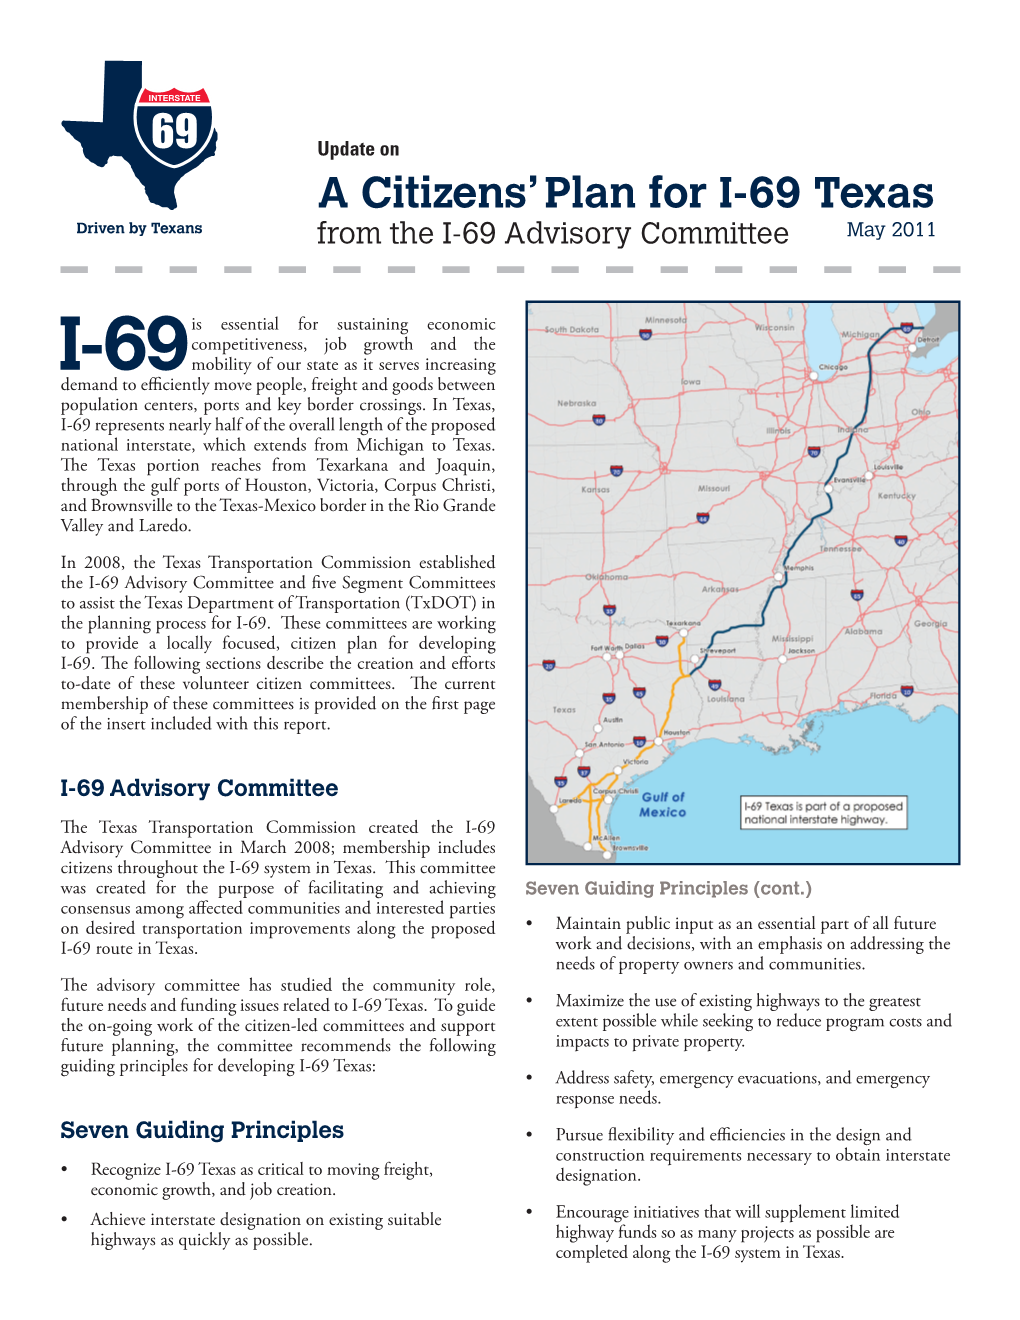 A Citizens' Plan for I-69 Texas